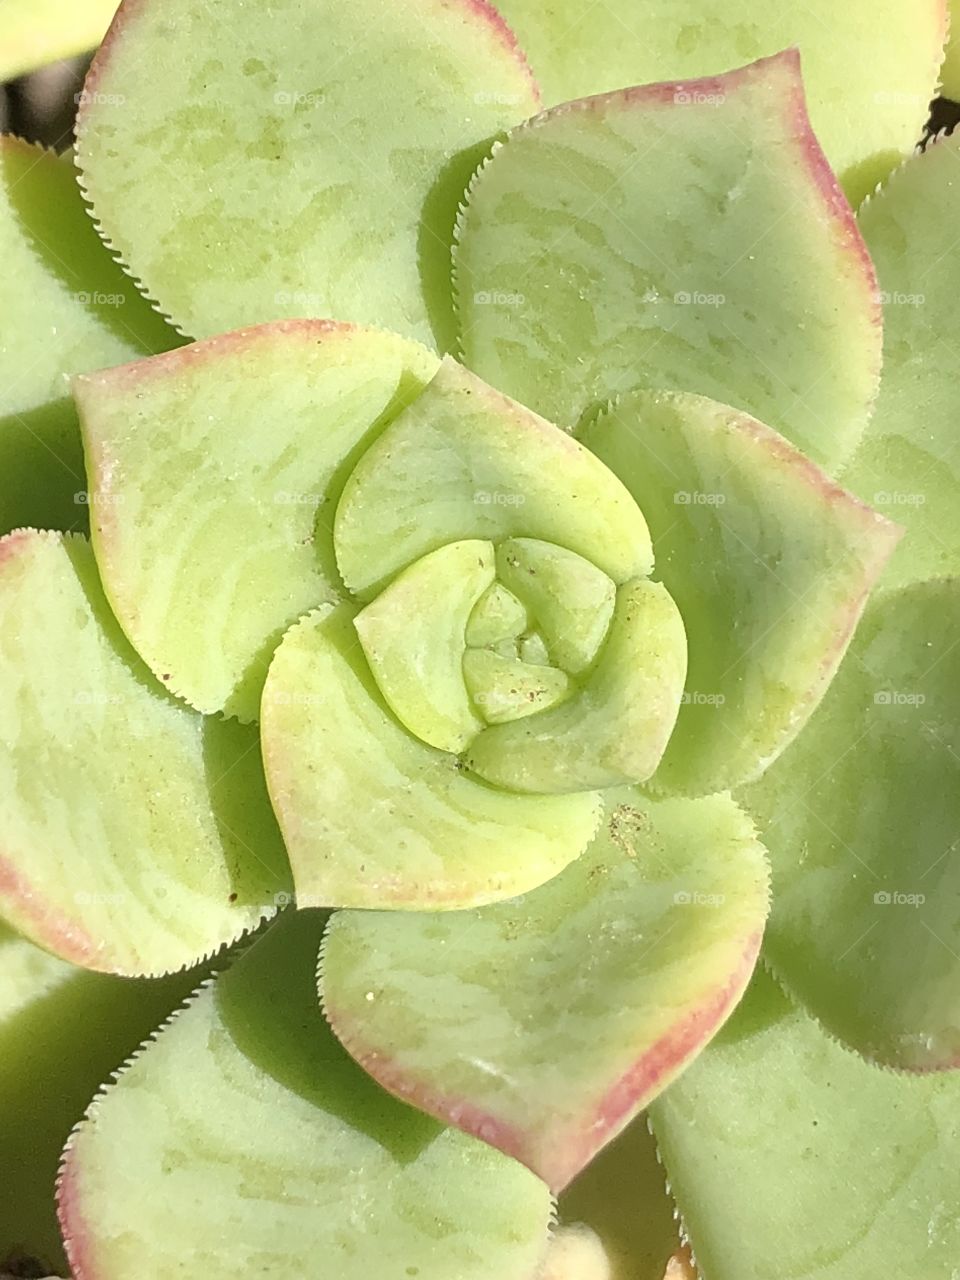 This beautiful flower-like succulent growing in my garden.